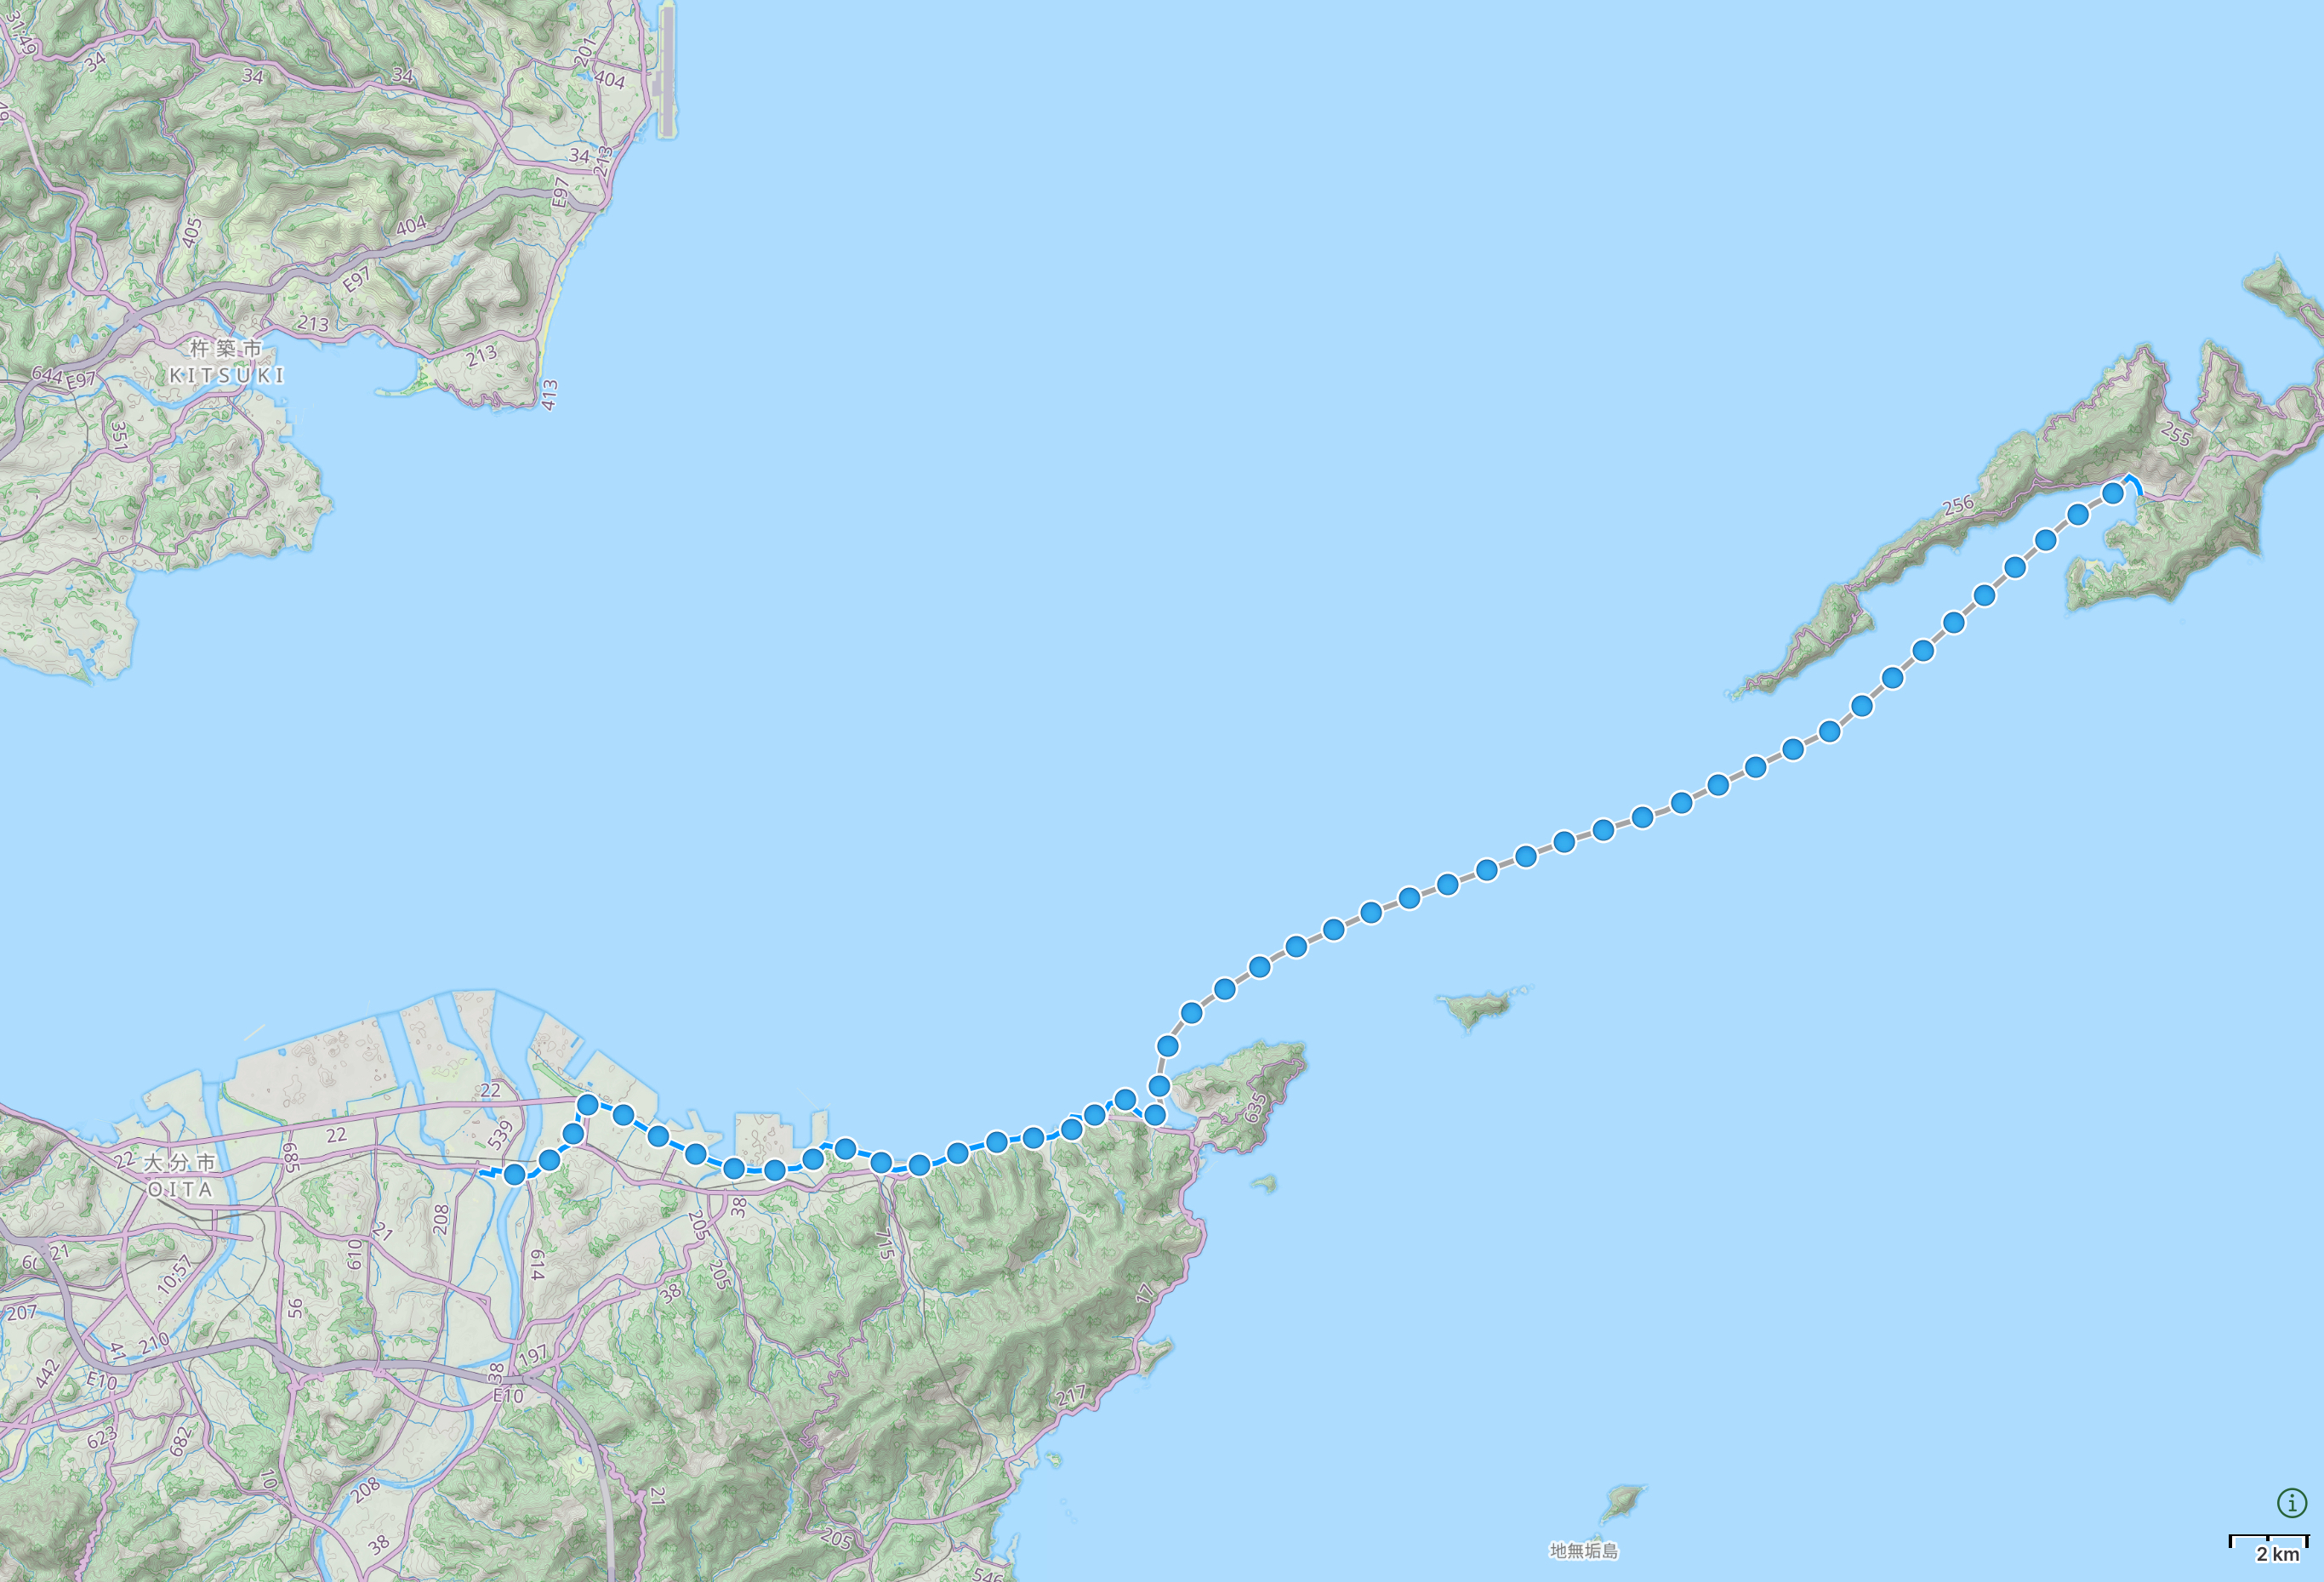 Map of the sea between Kyushu and Shikoku with author’s route from Ōita City across the sea to Misaki, Ehime highlighted.